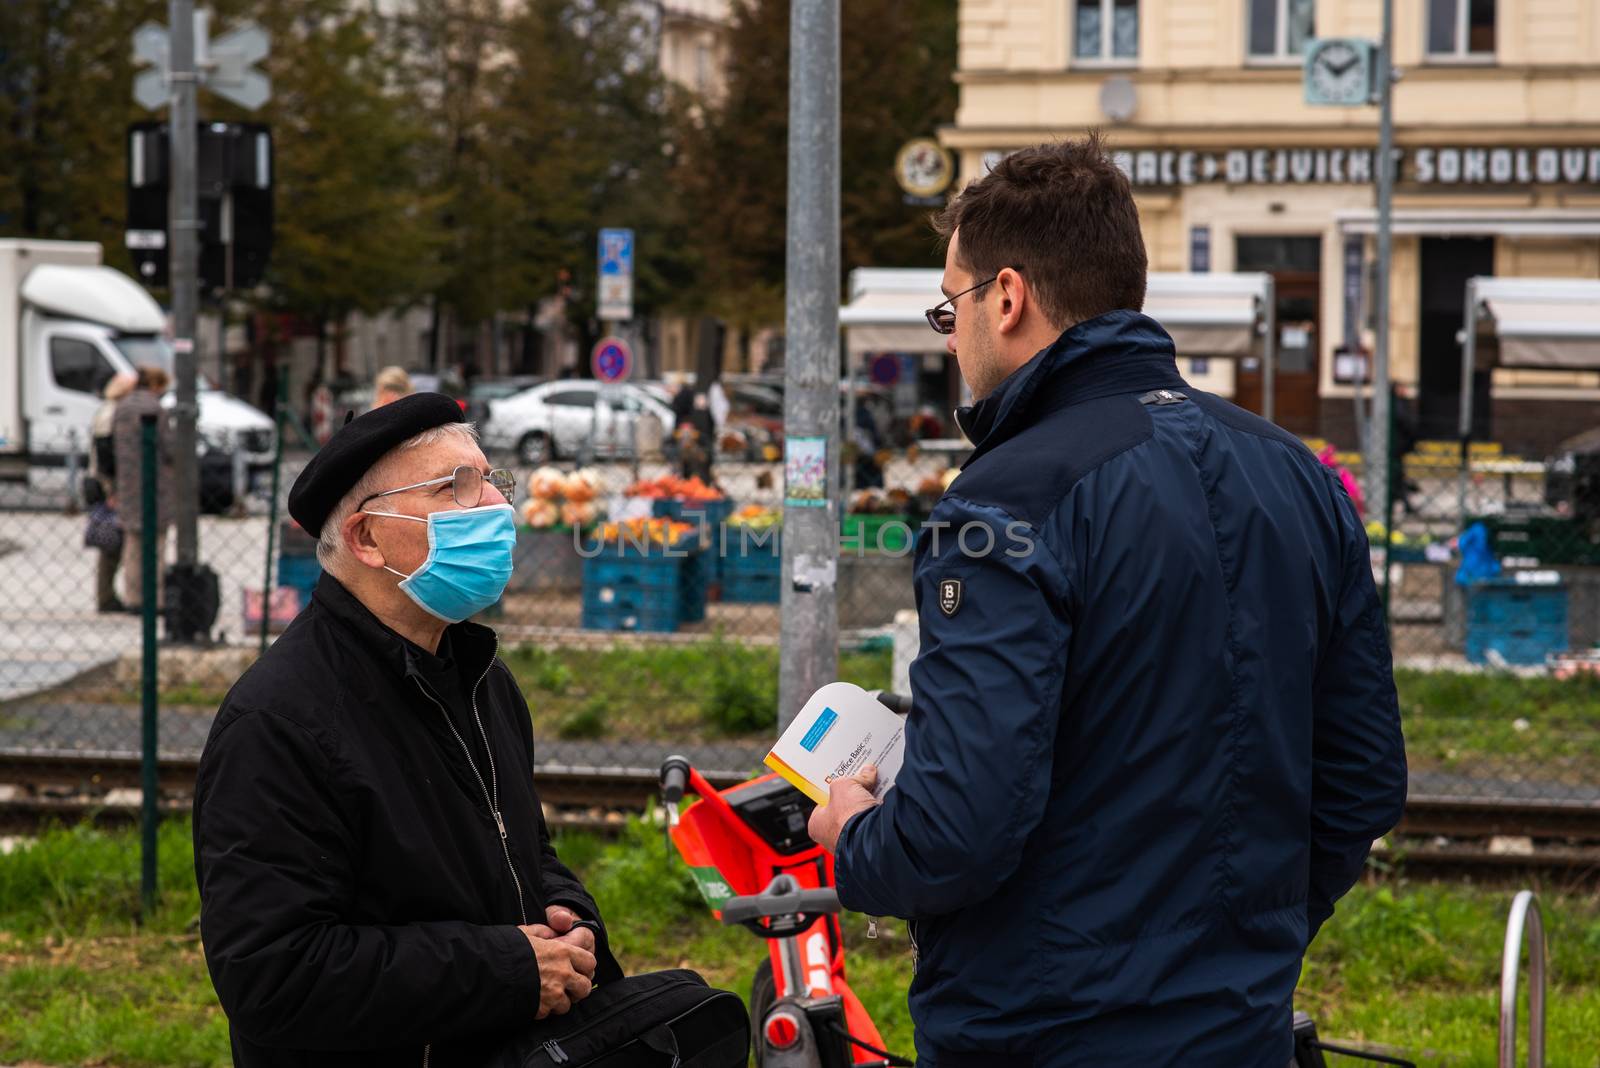 11/05/2020. Prague, Czech Republic. Two men (one with mask) are talking at Hradcanska metro station during quarantine period due to outbreak of COVID-19 as winter is starting. Prague, Czech Republic by gonzalobell